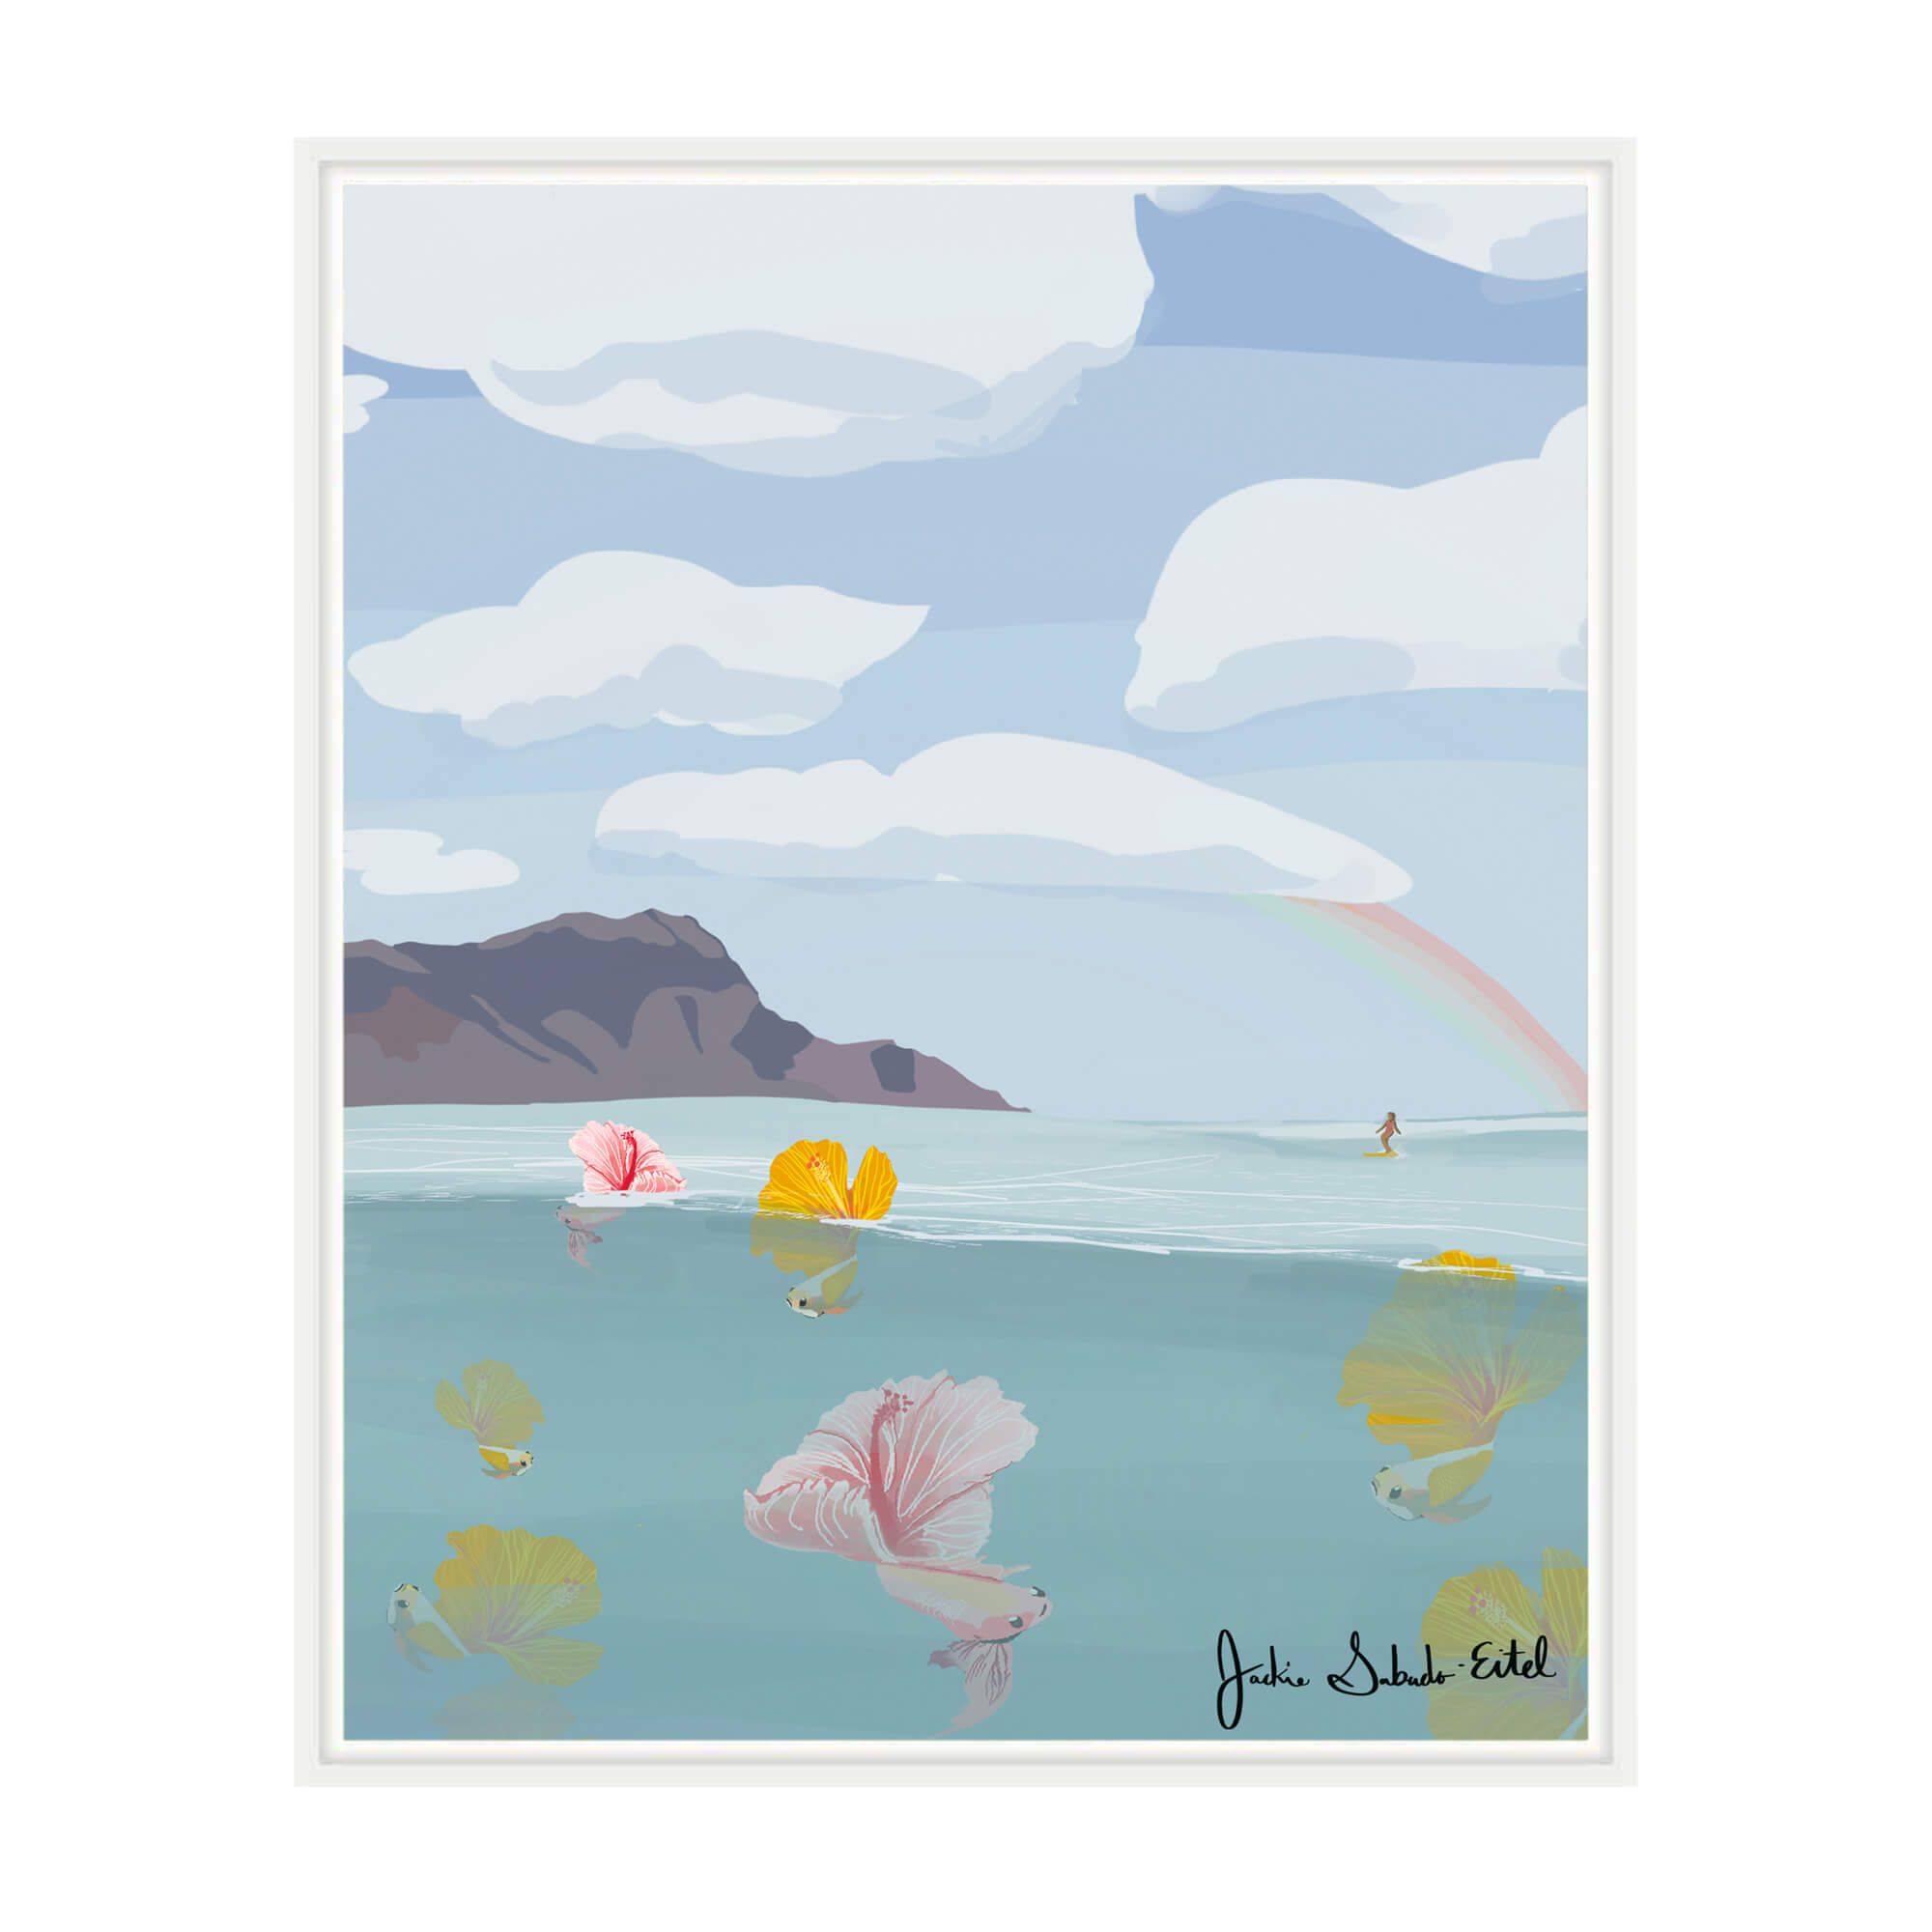 A framed canvas giclée print featuring colorful tropical fish with hibiscus flowers as their tails, the Diamond Head in the background with a woman surfing by Hawaii artist Jackie Eitel